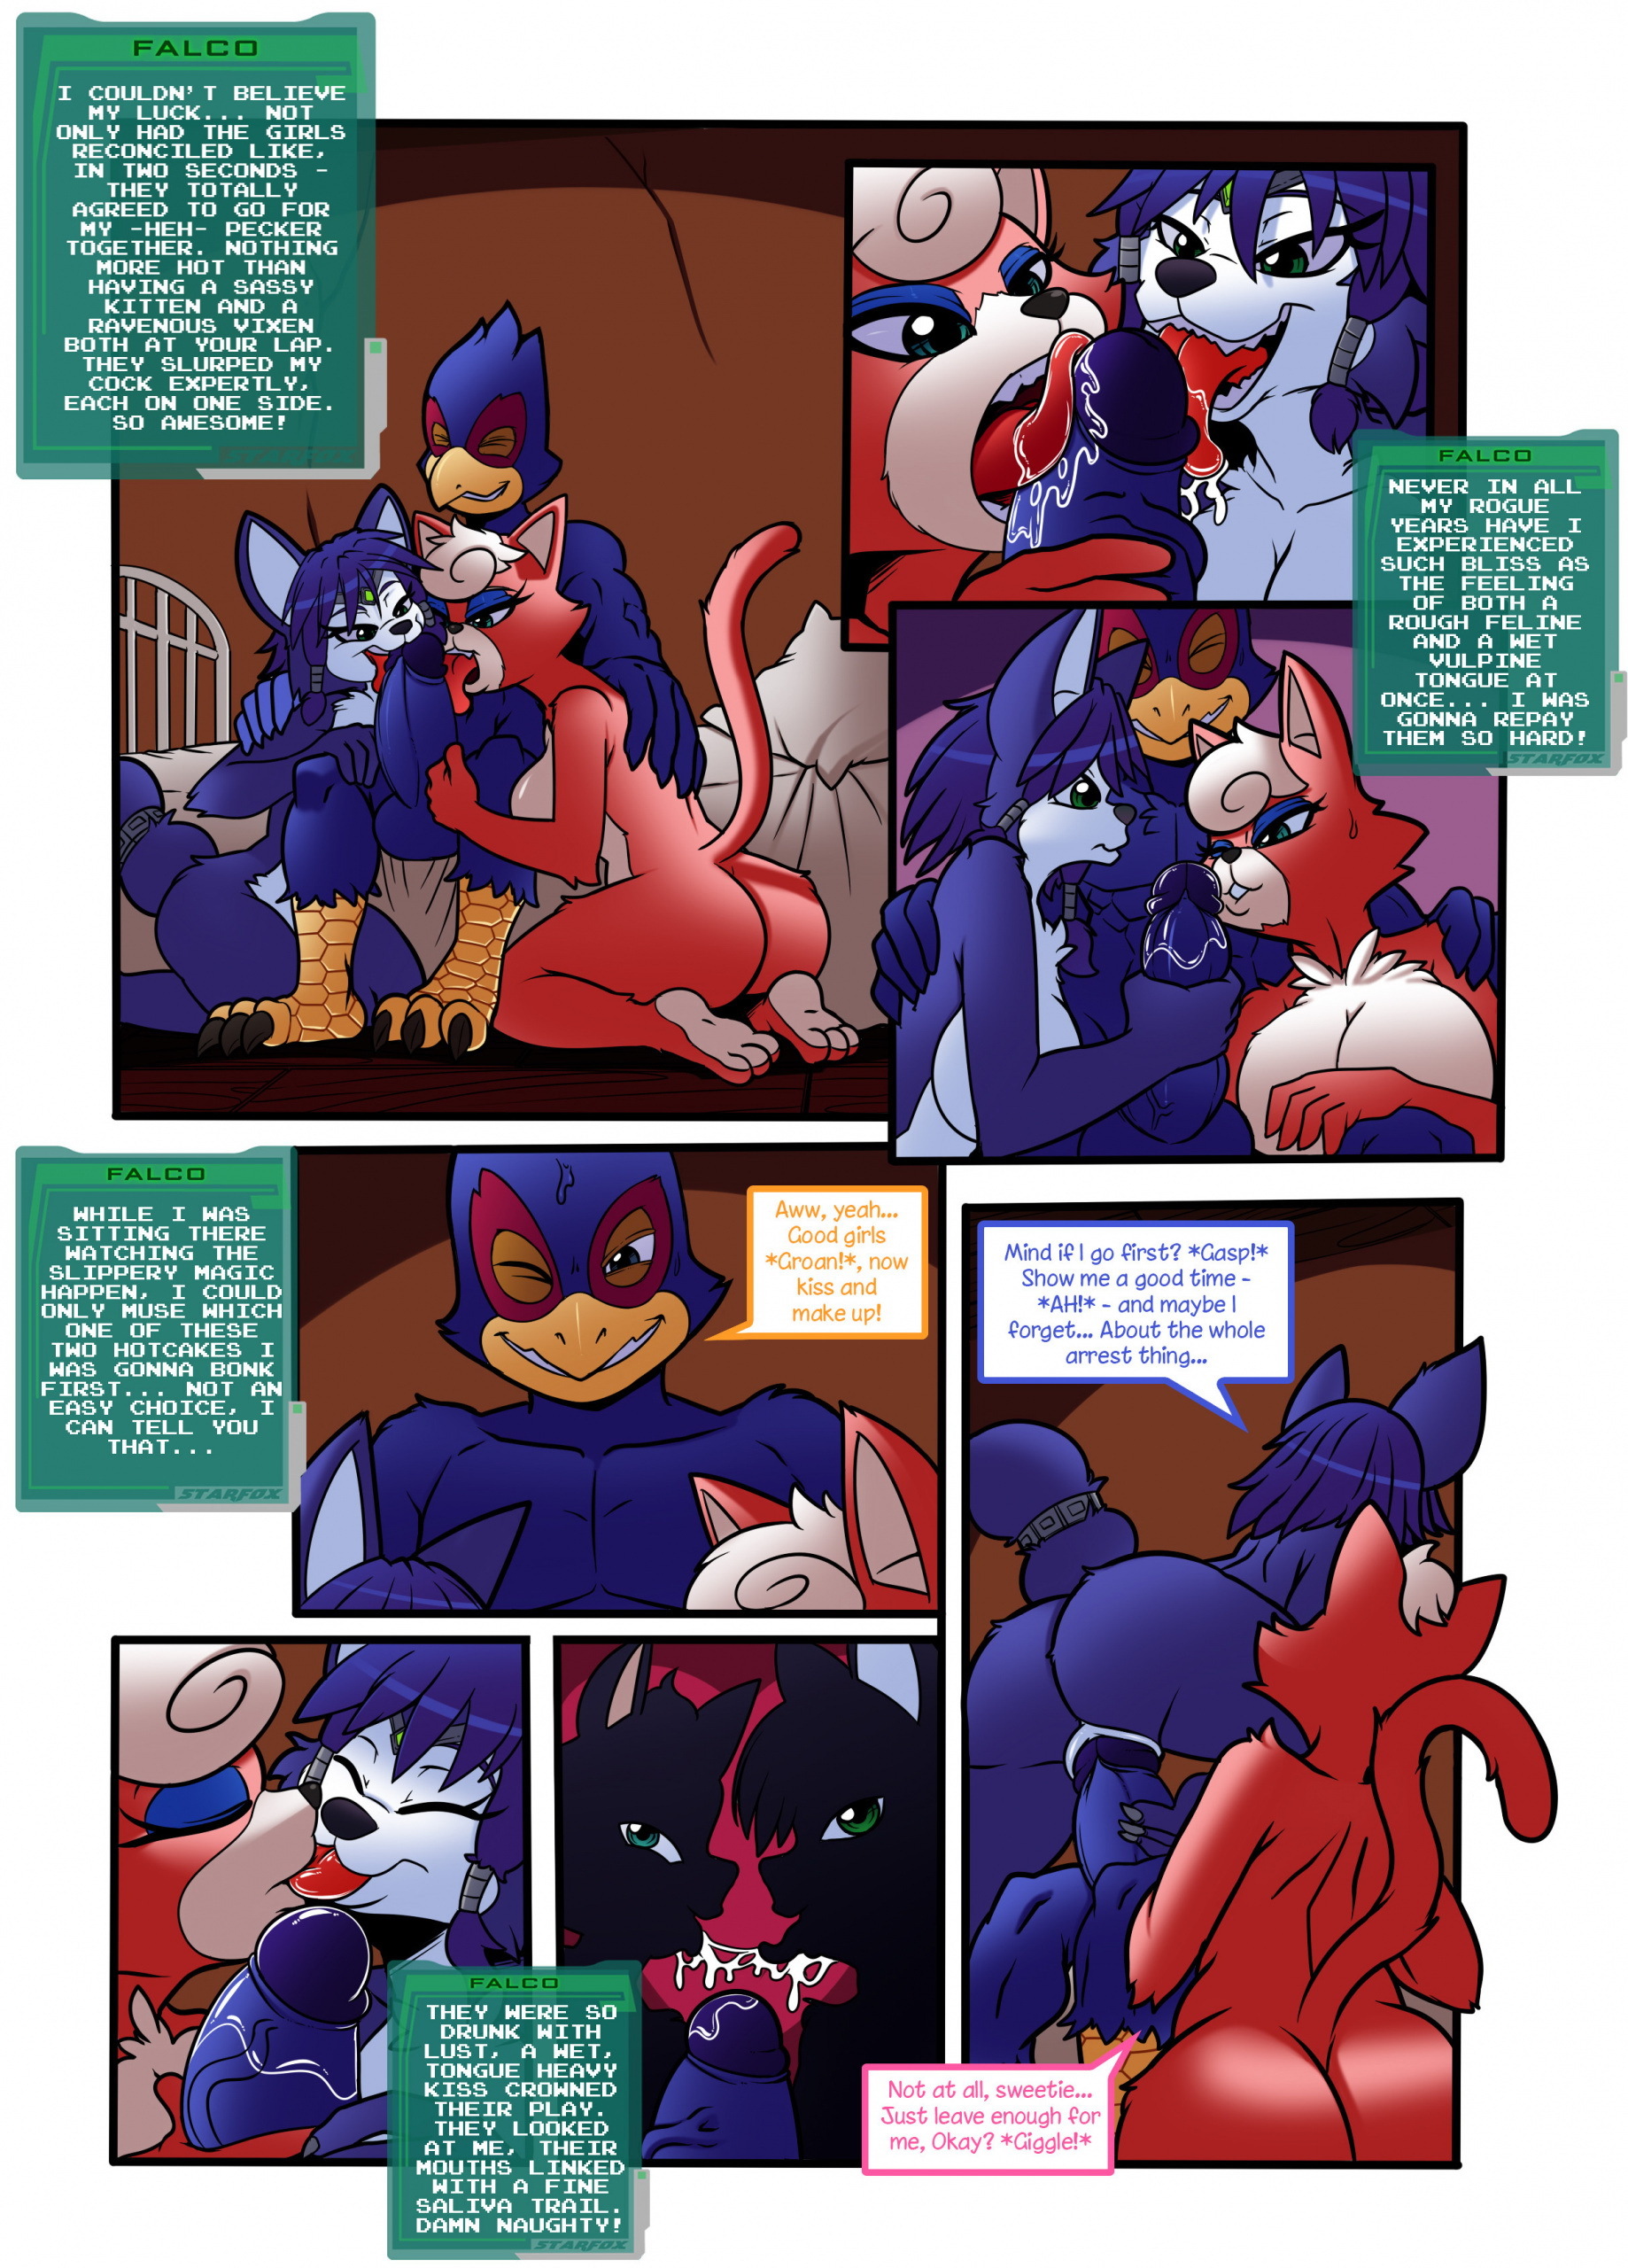 Assault and Flattery - Page 6